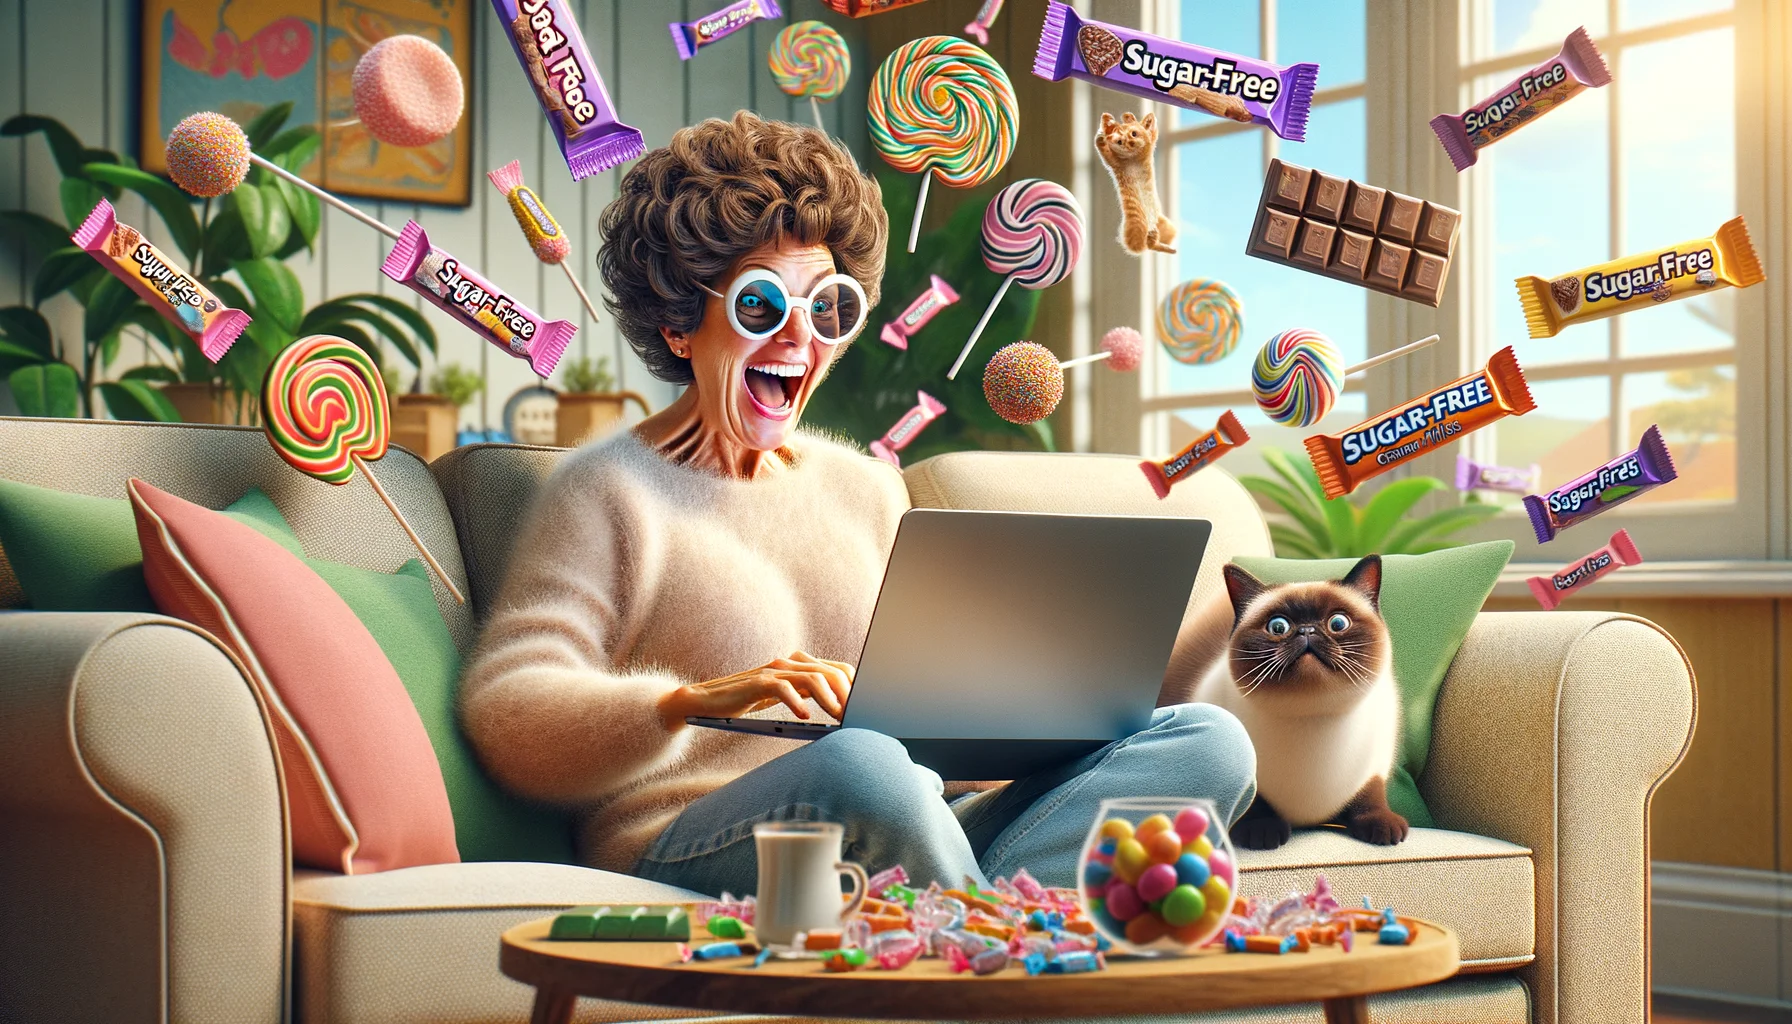 Imagine a humorous scene that perfectly depicts the ease and convenience of online shopping for sugar-free candies. The setting is a comfortably furnished living room on a sunny afternoon. An ecstatic middle-aged Caucasian woman is lounging on a plush sofa, her short, curly, brown hair bobbing as she delights over her laptop screen. The screen displays a vibrant eCommerce site dedicated to a variety of sugar-free candies. Scattered around her, colorful illustrations of lollipops, gumdrop packets, licorice sticks, and chocolate bars float in mid-air, each with a large 'Sugar-Free' tag. A humorous touch is added with a Siamese cat curiously batting at an imaginary floating candy.